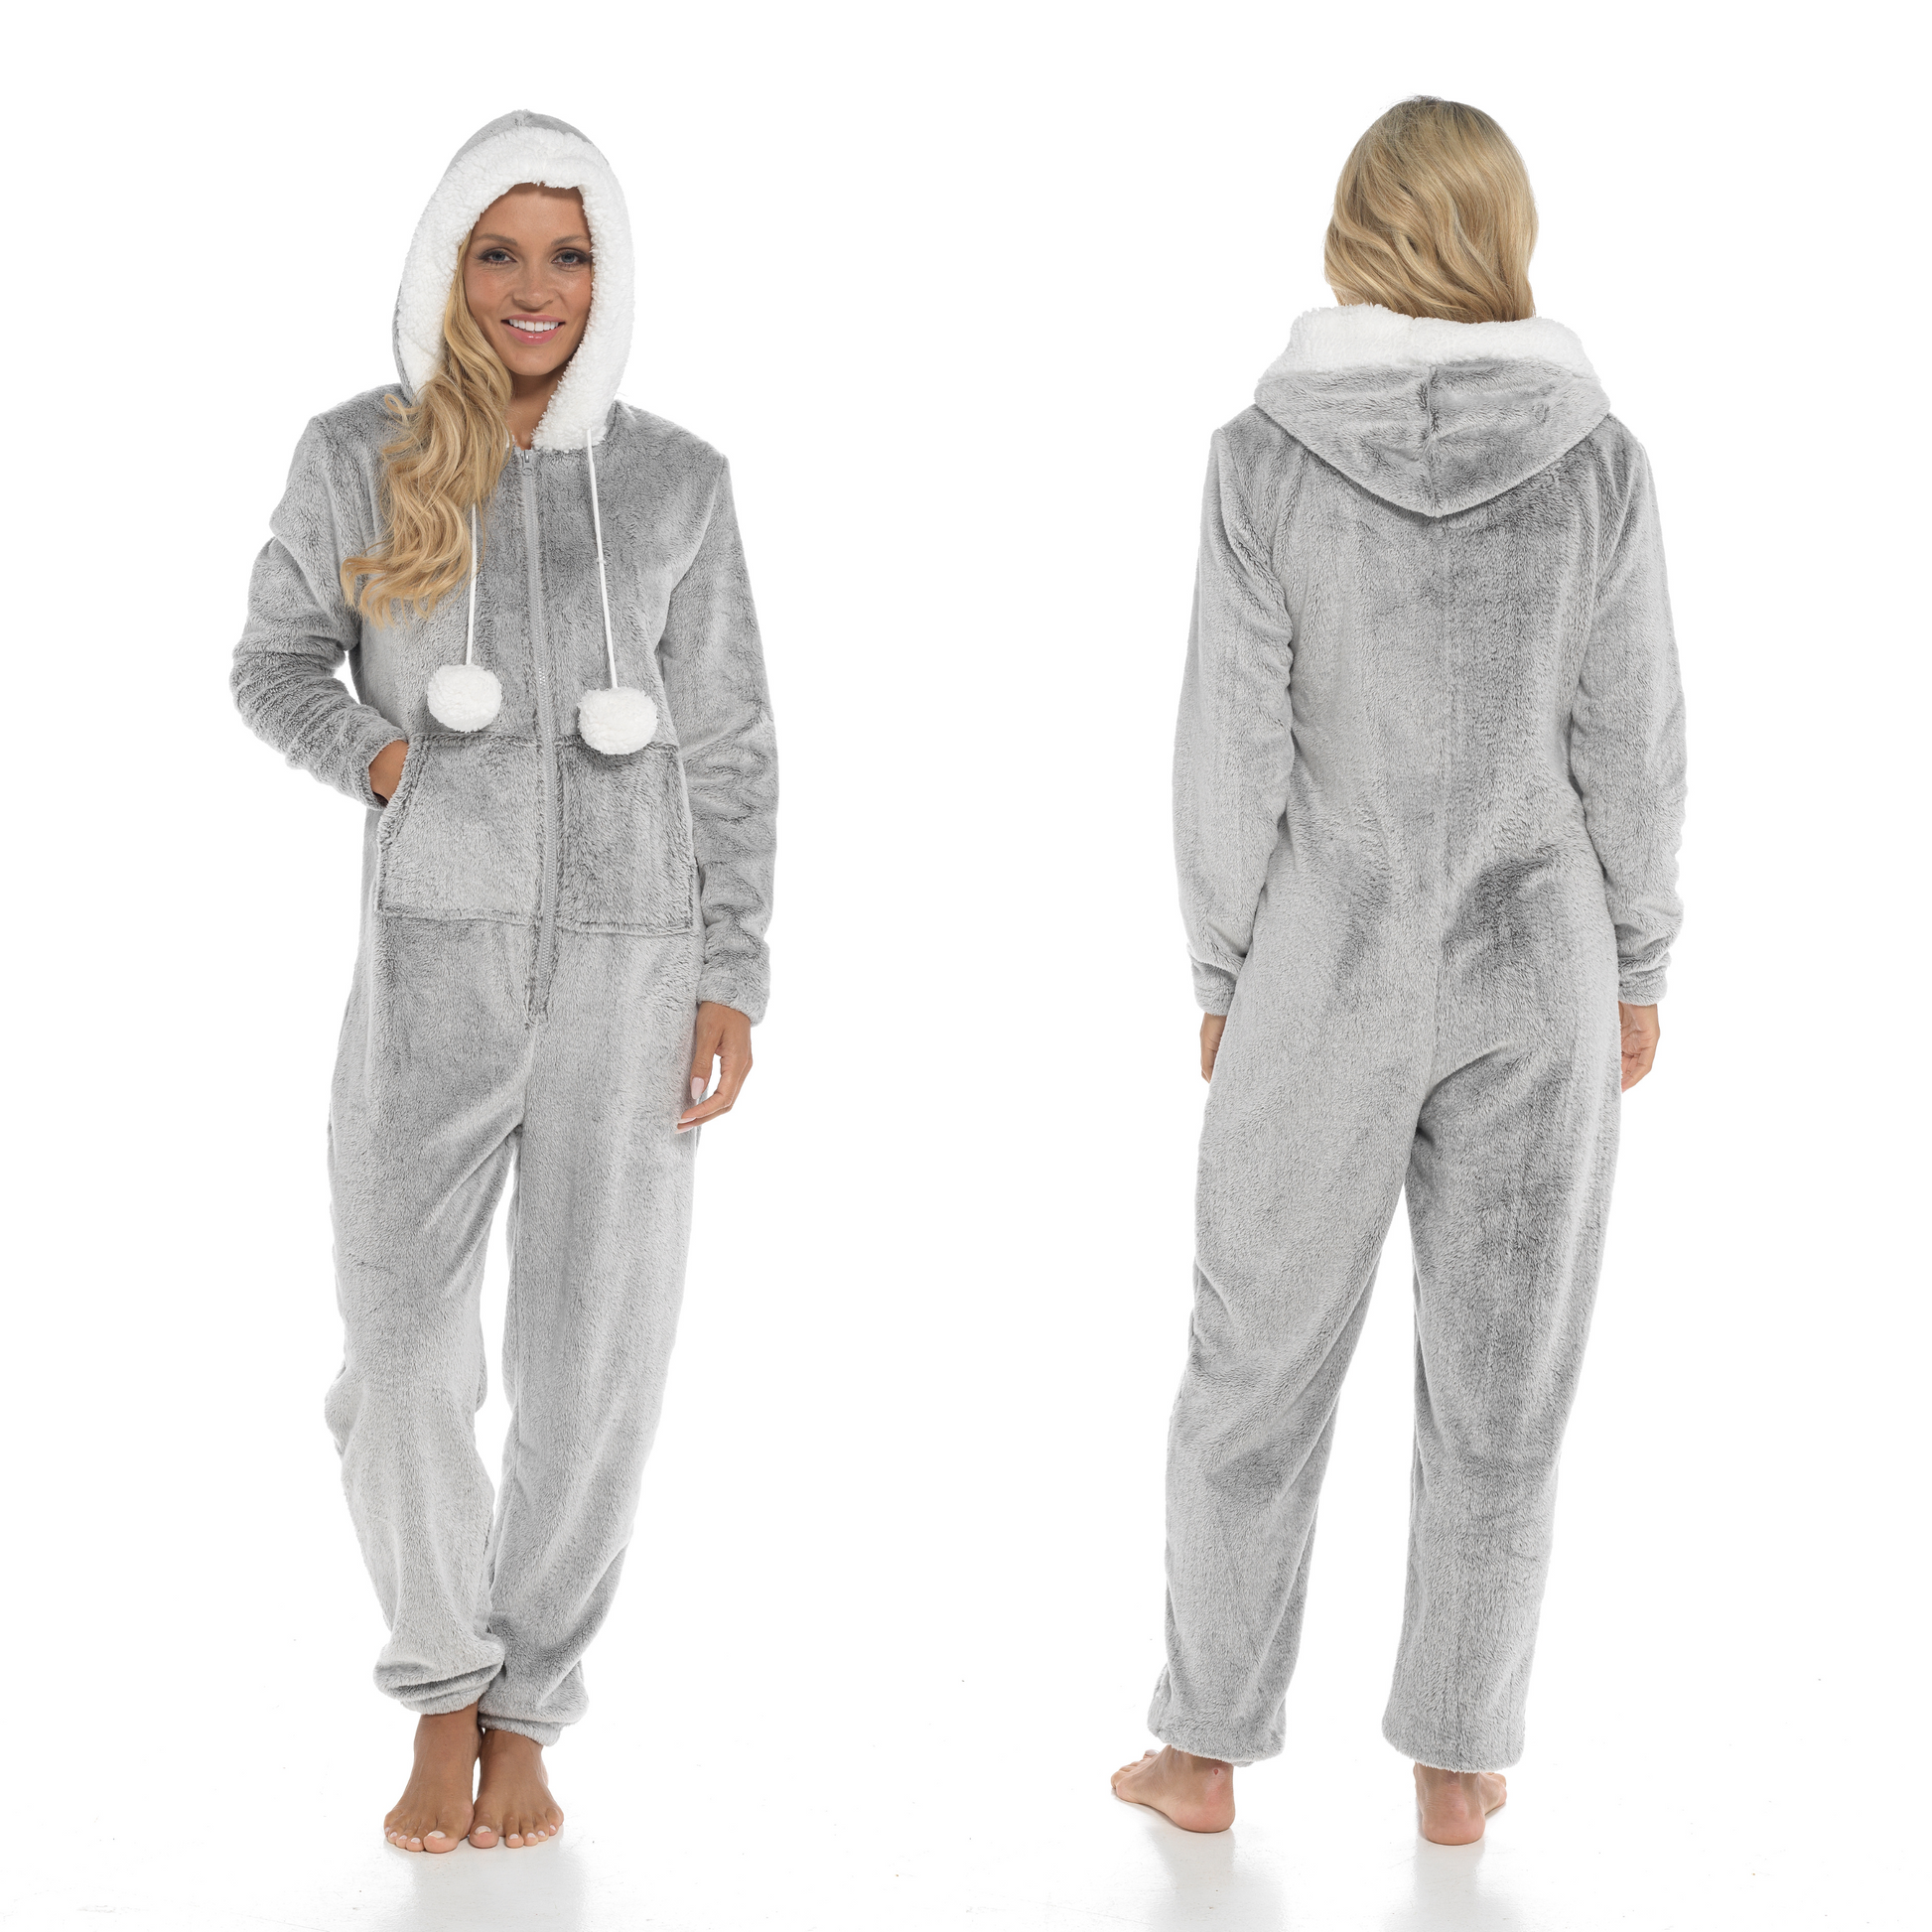 Women's Ultra-Soft Shimmer Fleece Hooded Onesie Pajama with Zip-Up Pockets and Cute Pompoms Warm Nightwear Ideal for Winter Comfort Daisy Dreamer. Buy now for £25.00. A Pyjamas by Daisy Dreamer. _Hi_chtgptapp_optimised_this_description-generator,_Hi_chtgp